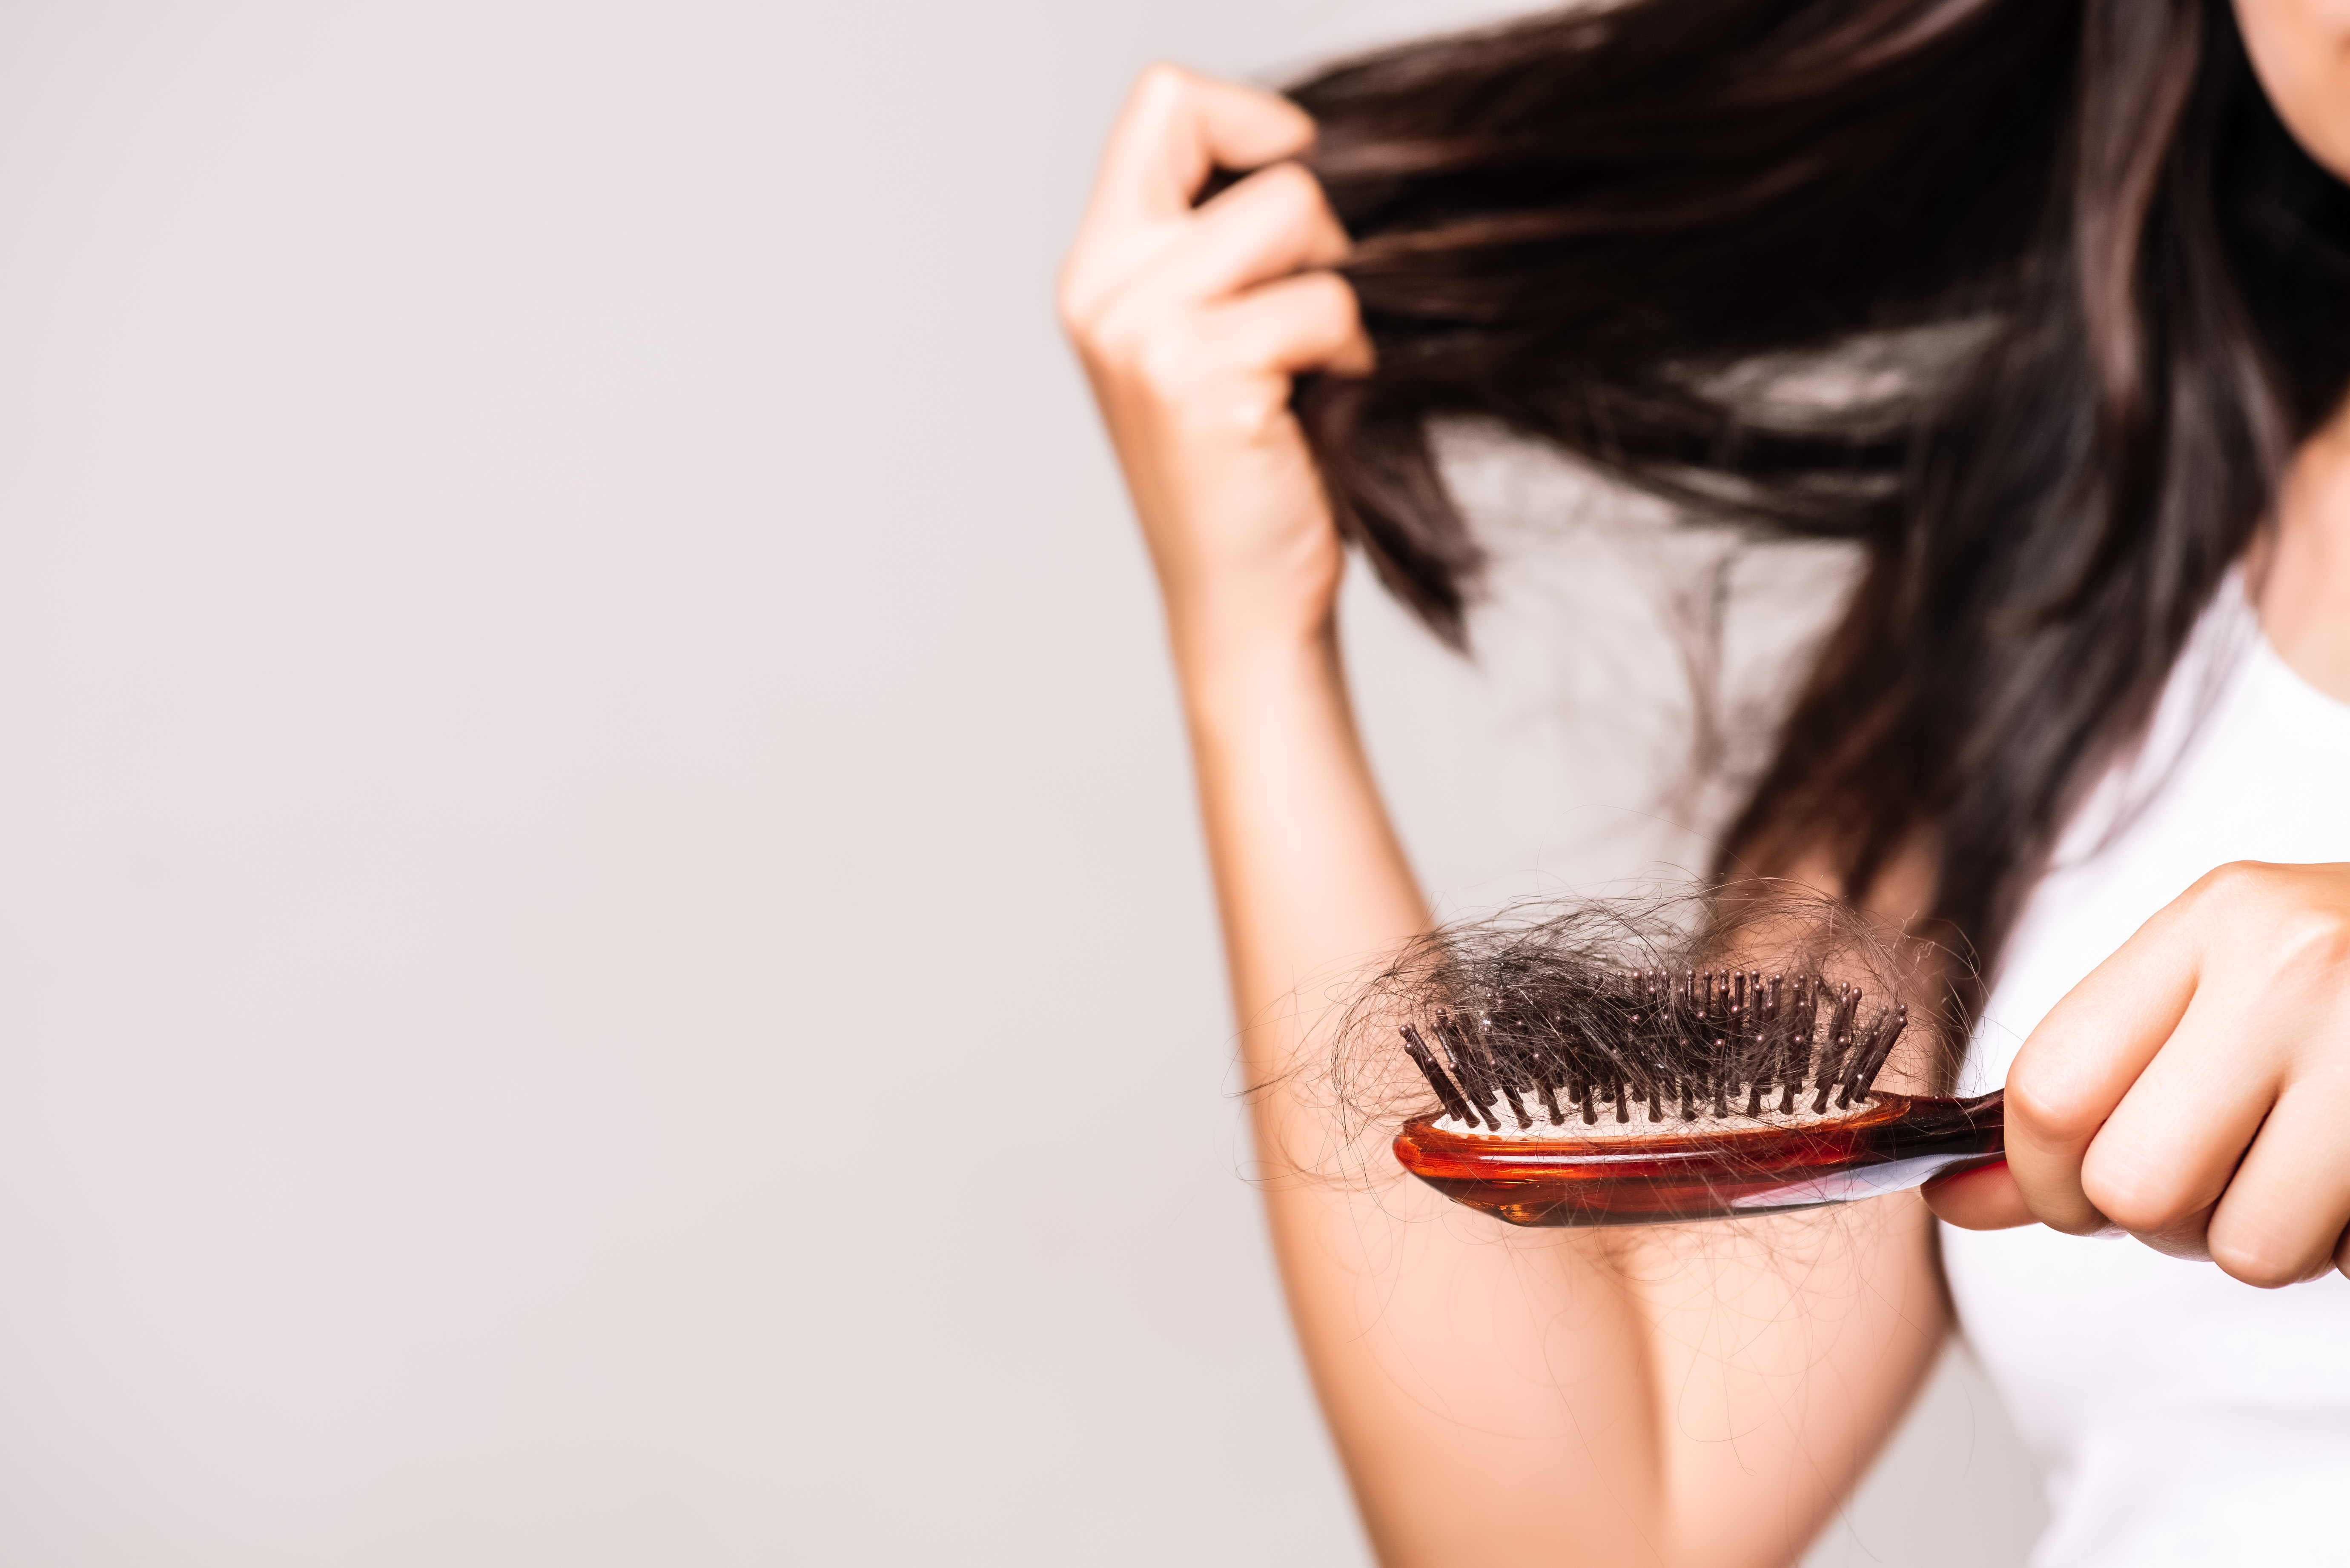 Some mums experience an increase in the amount of hair loss, sometimes even in clumps, causing clogged shower drains and excessive shedding on their pillow